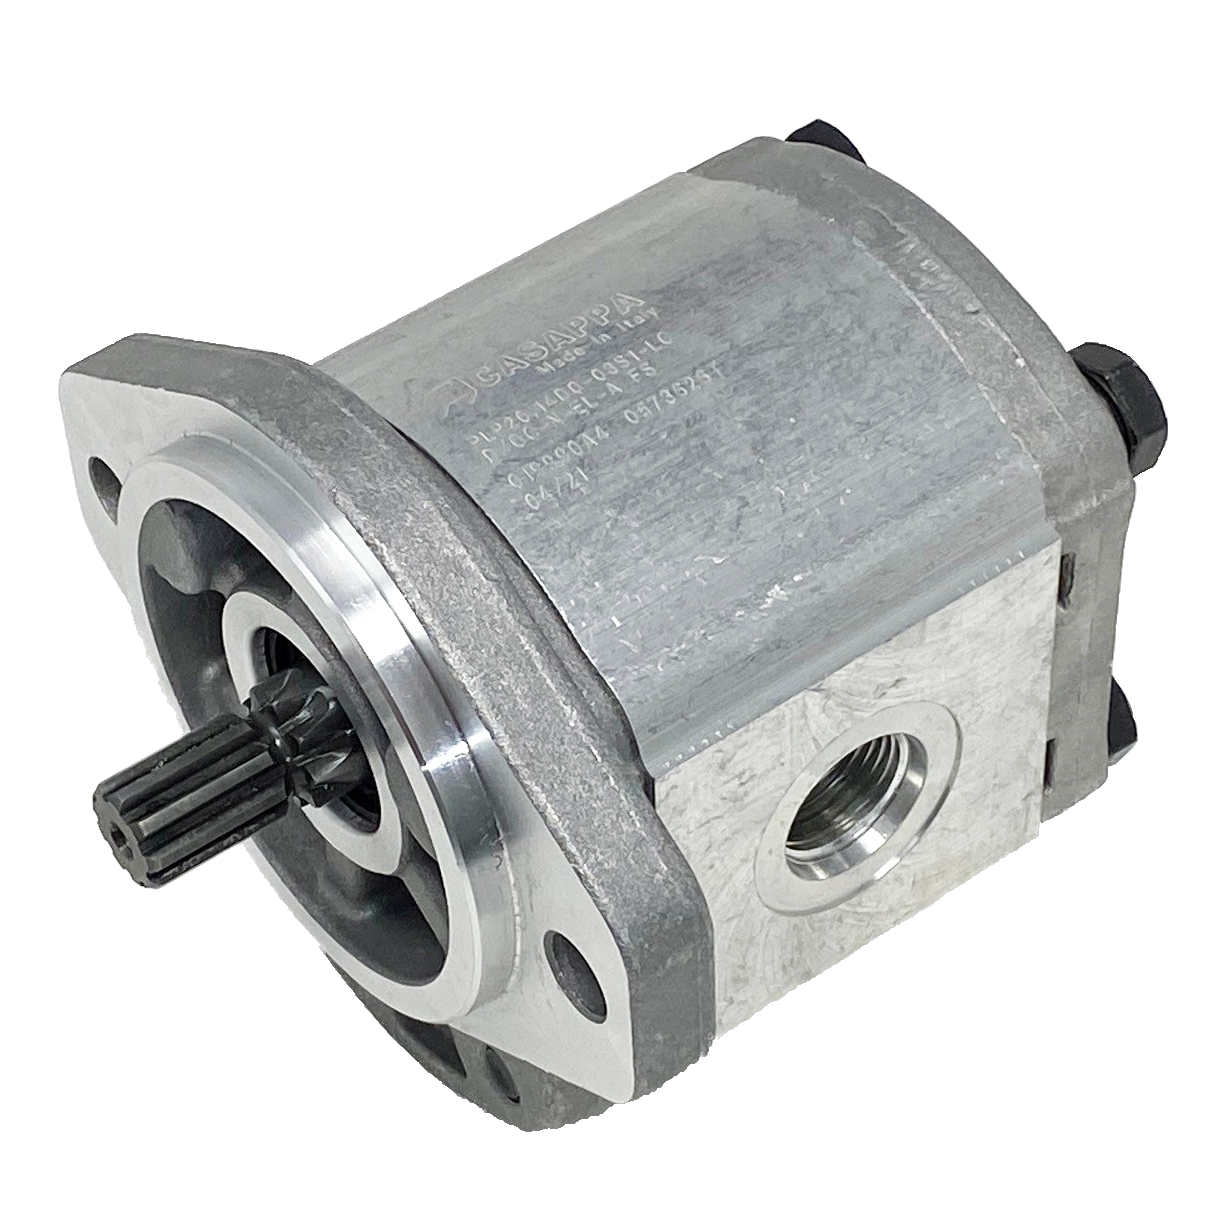 PLP20.14S0-49S1-LOD/OC-N-EL : Casappa Polaris Gear Pump, 14.53cc, 3625psi Rated, 3500RPM, CCW, 5/8" Keyed Shaft, SAE A 2-Bolt Flange, 1" #16 SAE Inlet, 0.625 (5/8") #10 SAE Outlet, Aluminum Body & Flange